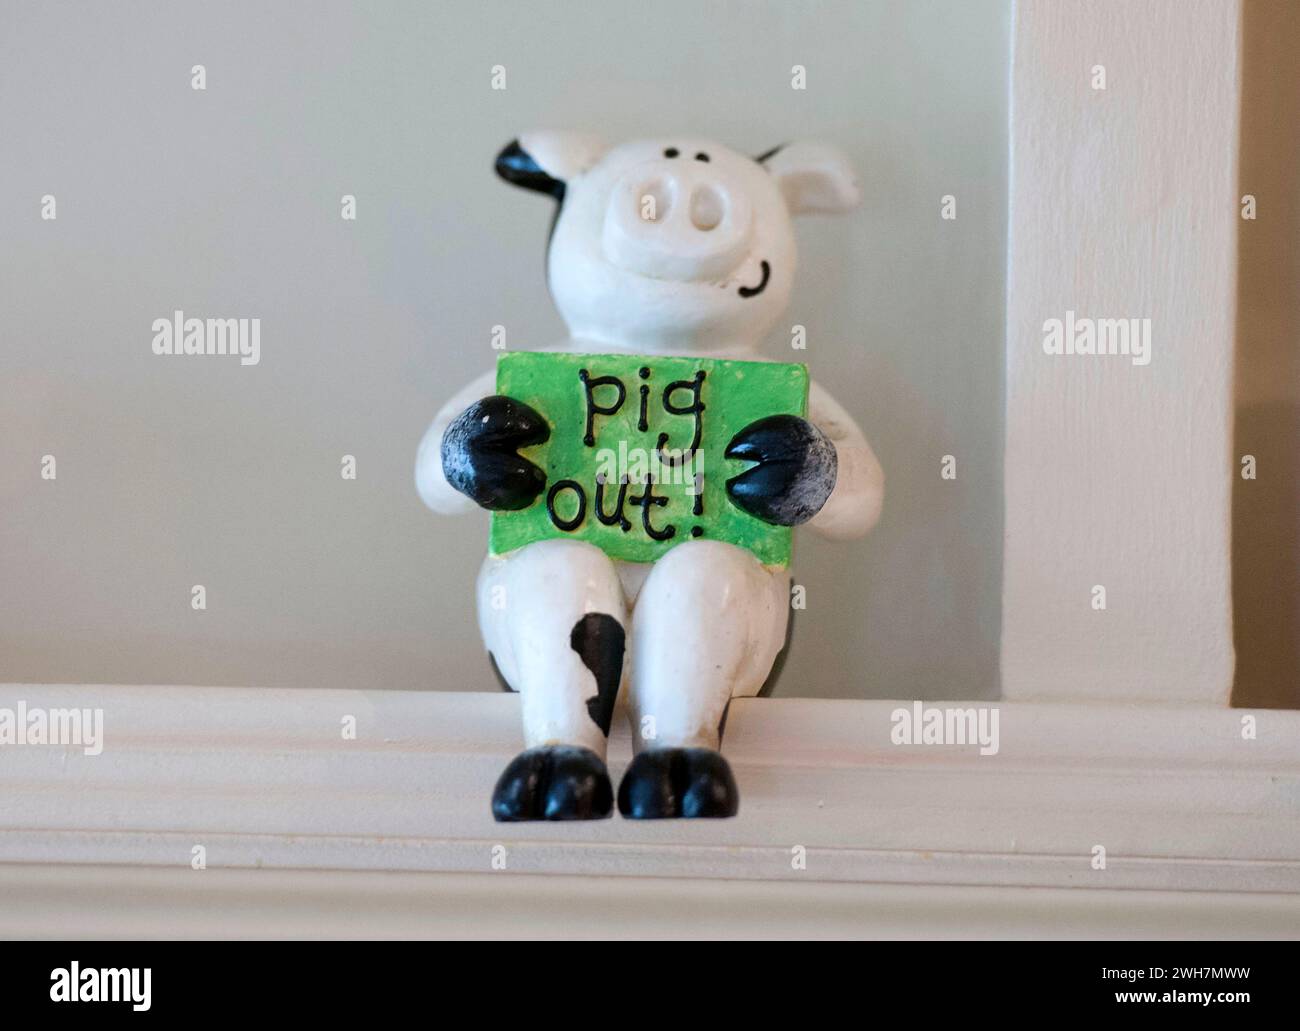 Pig Out ornament Stock Photo